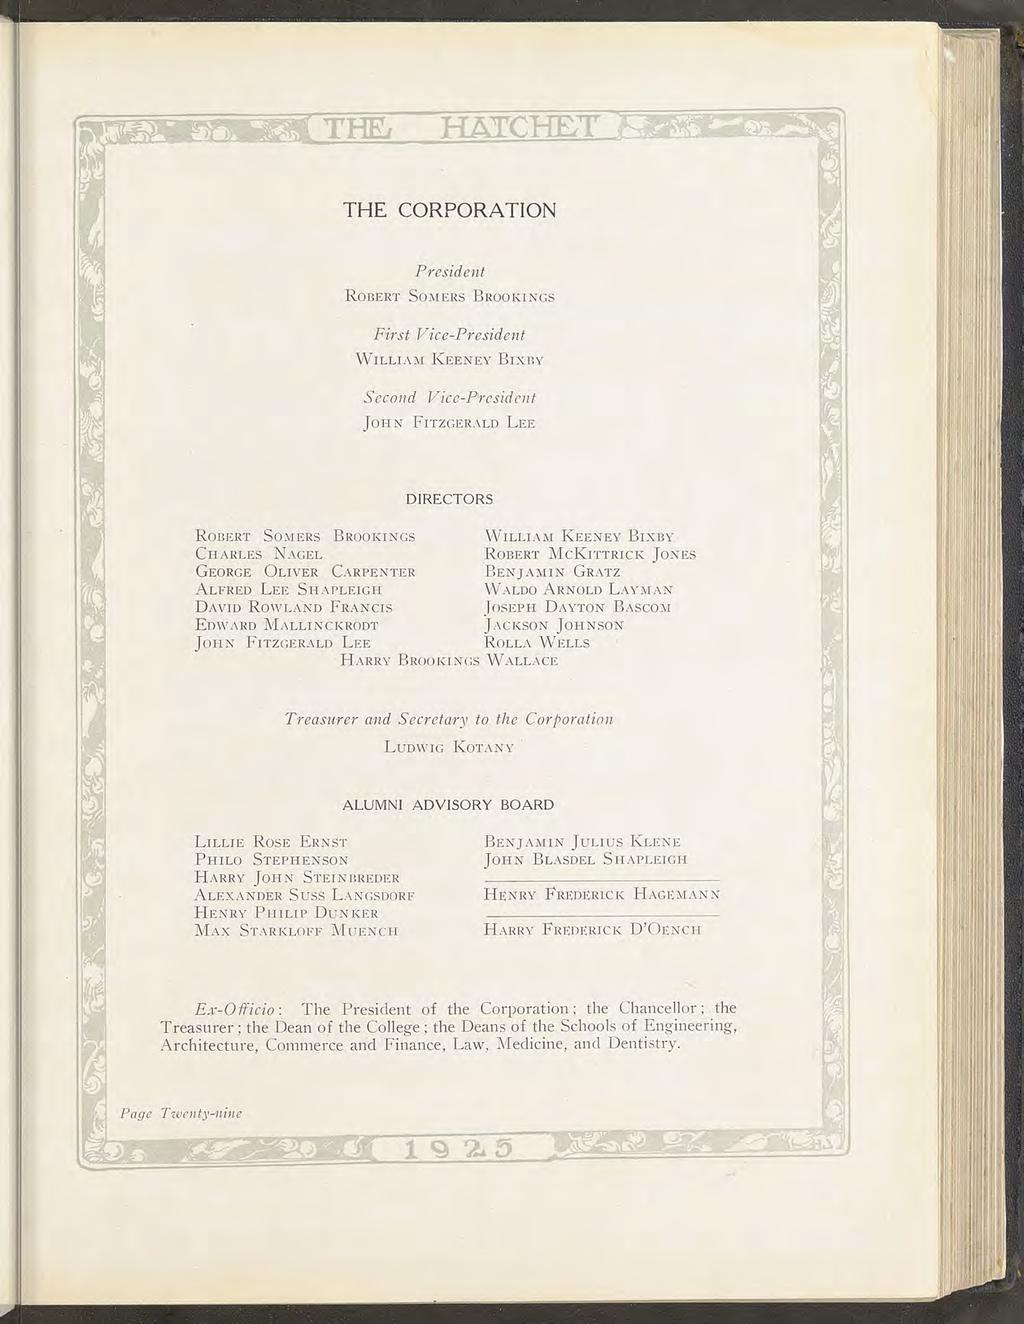 THE/ HCTCHET THE CORPORATION President ROBERT SOMERS BROOKINGS First Vice-President WILLIAM KEENEY BIXBY Second Vice-President JOHN FITZGERALD LEE Ha DIRECTORS ROBERT SOMERS BROOKINGS CHARLES NAGEL